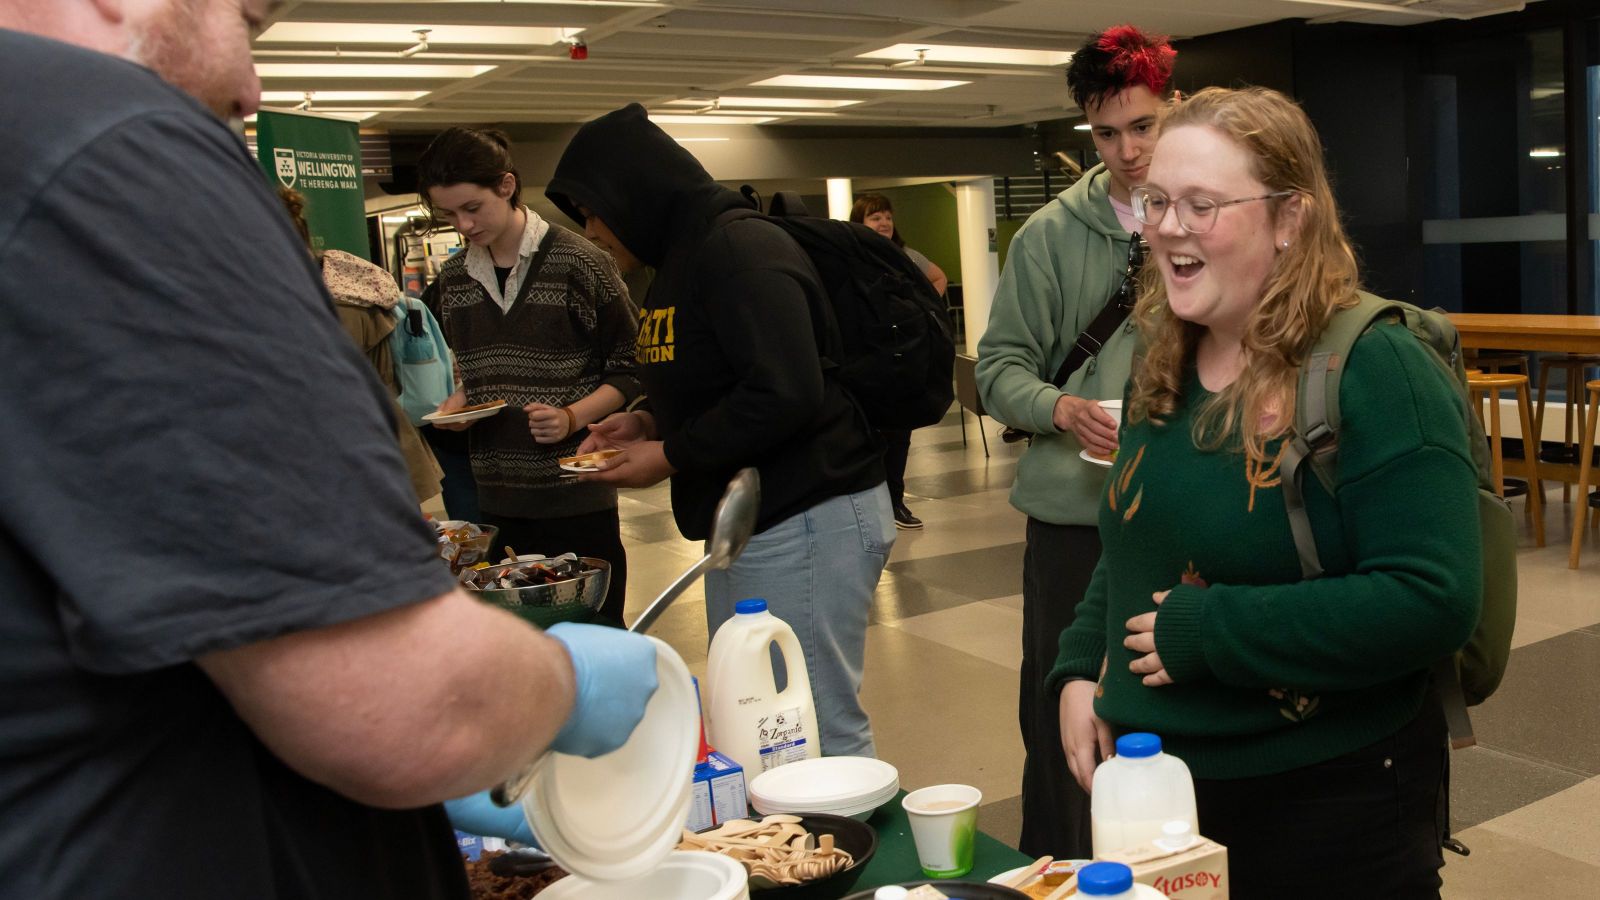 delighted looking blond student wearing forest green top receiving breakfast 